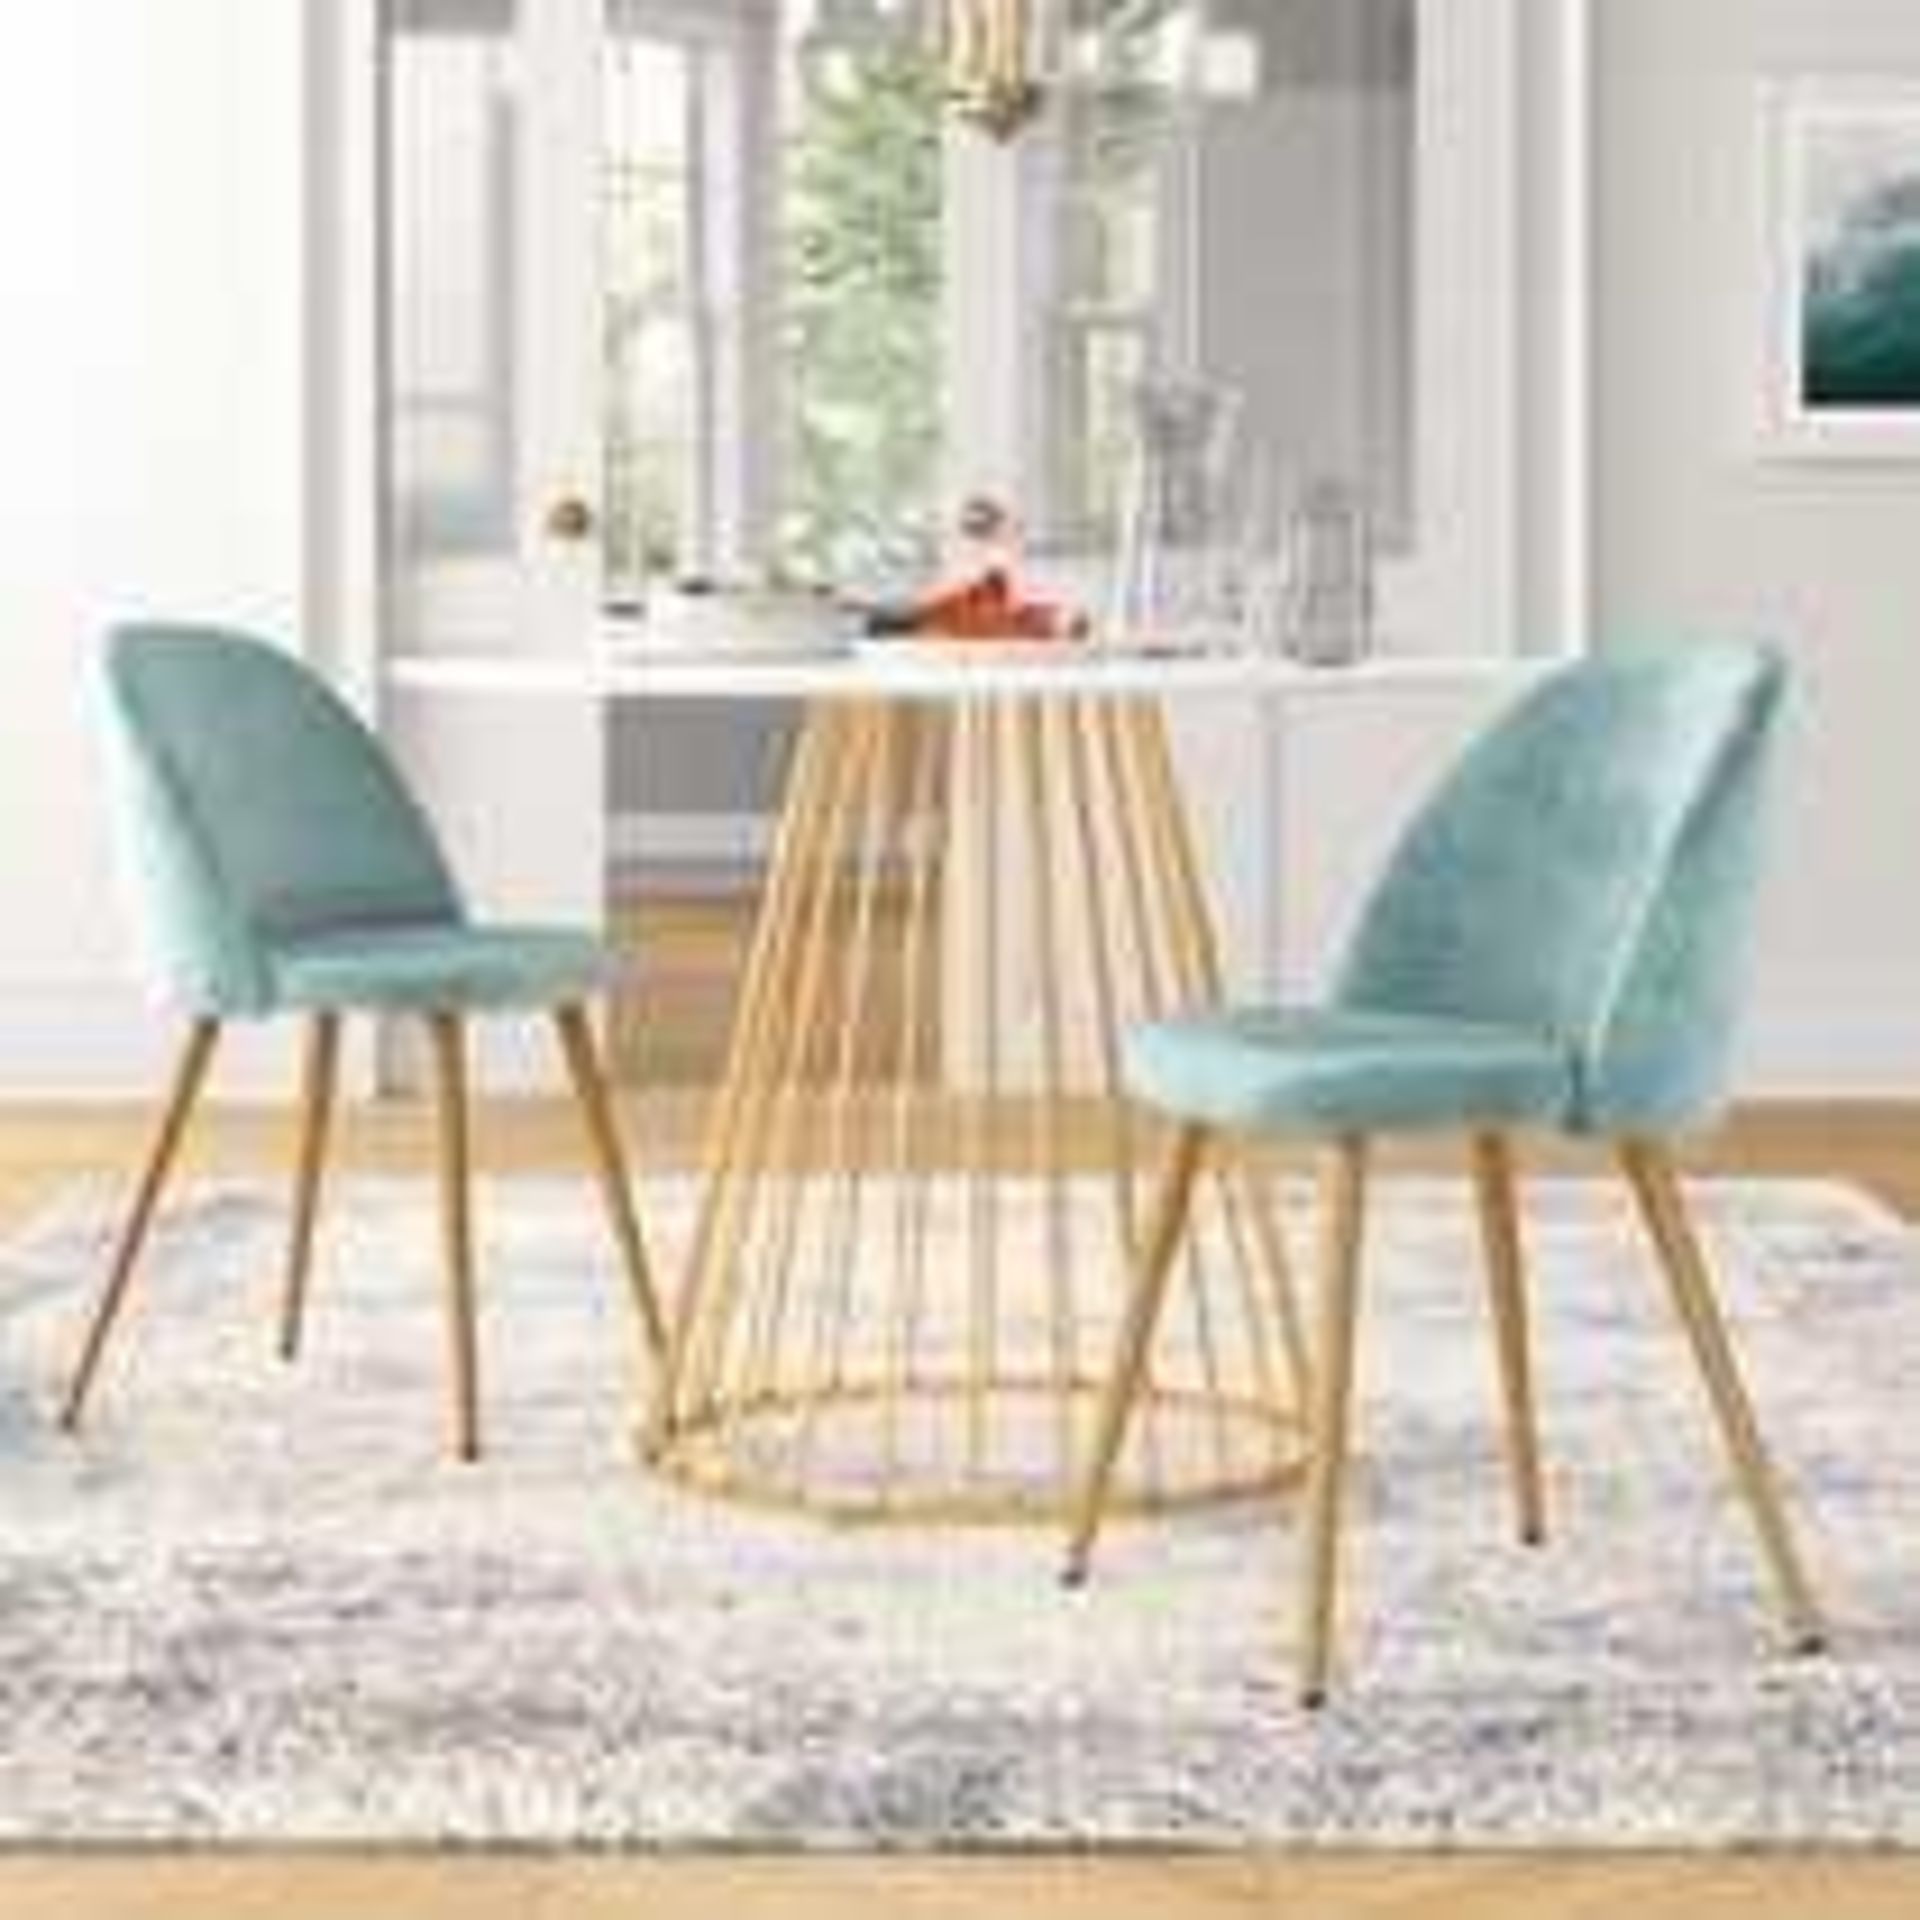 (Jb) RRP £170 Lot To Contain 1 Boxed Wayfair Chattooga Upholstered Designer Dining Chair